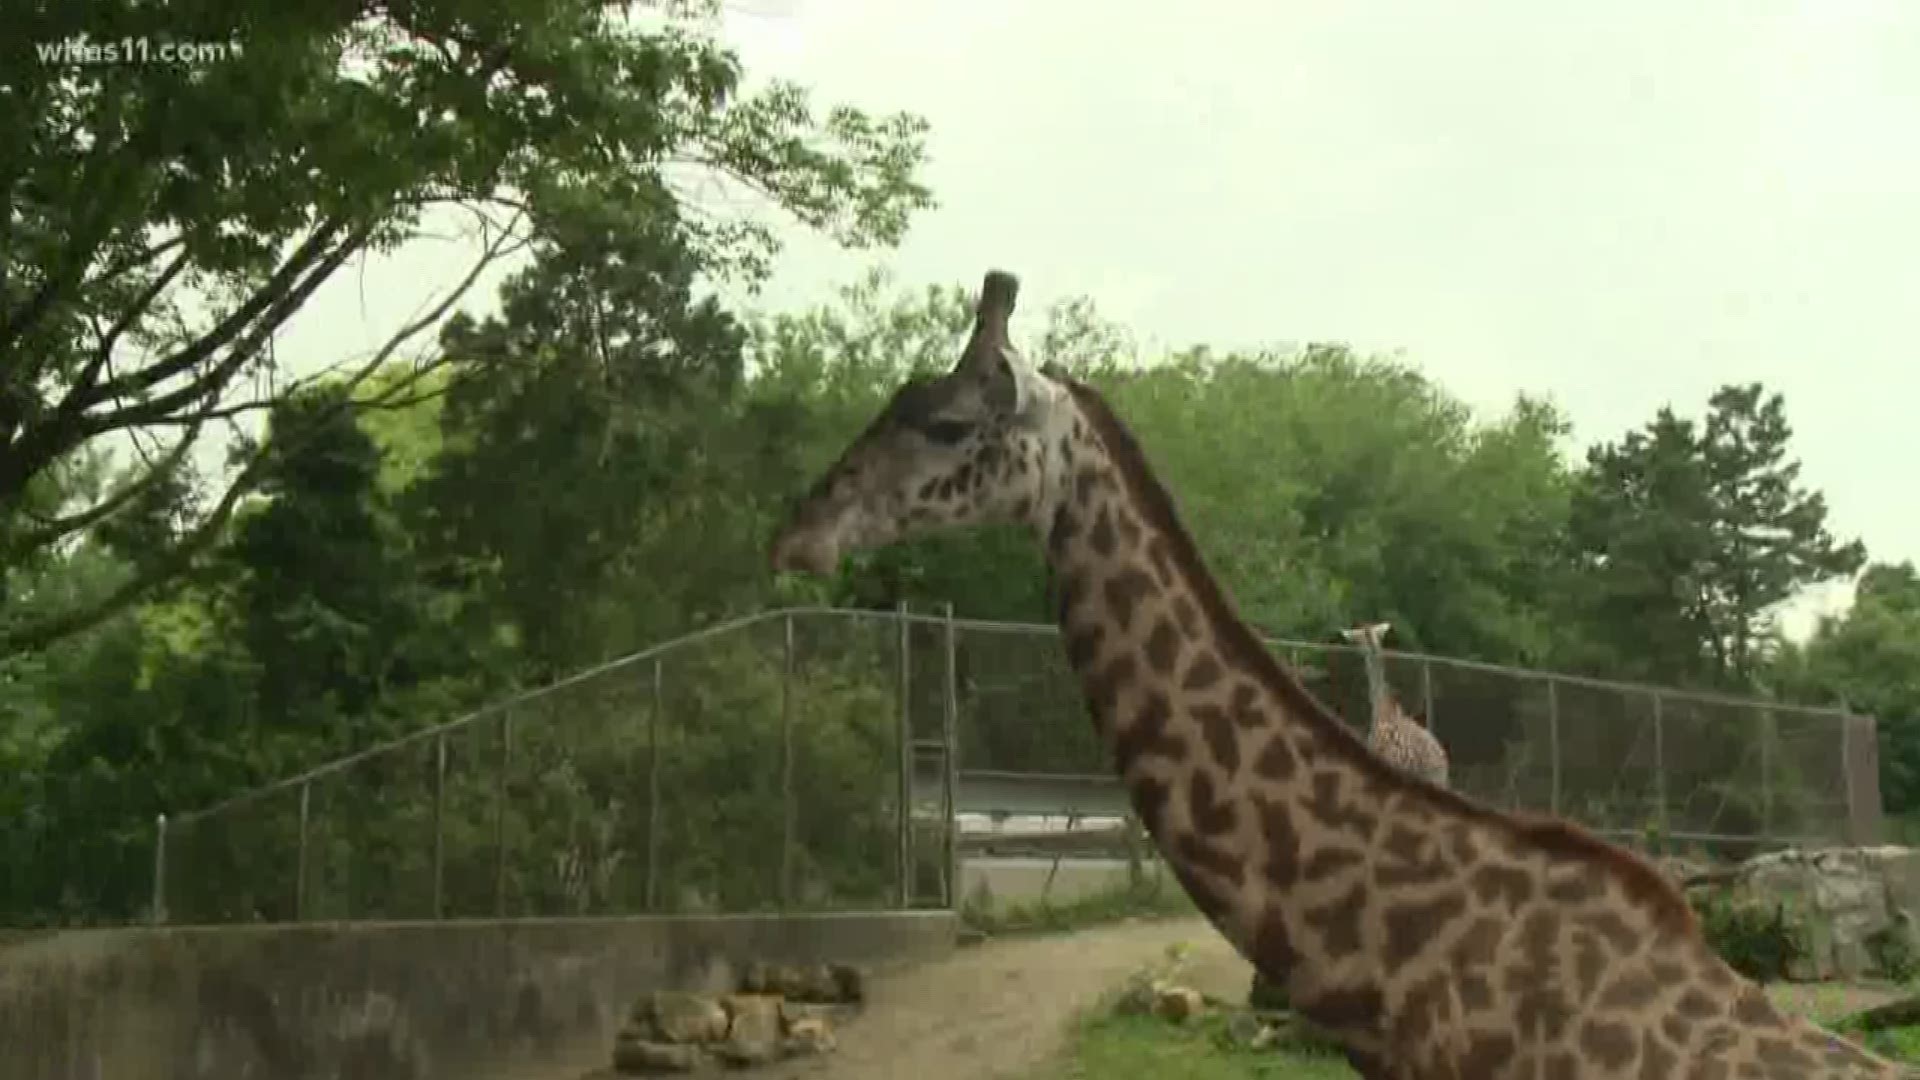 We took a trip to the Louisville Zoo to visit Baridi and to learn a little more about giraffes.